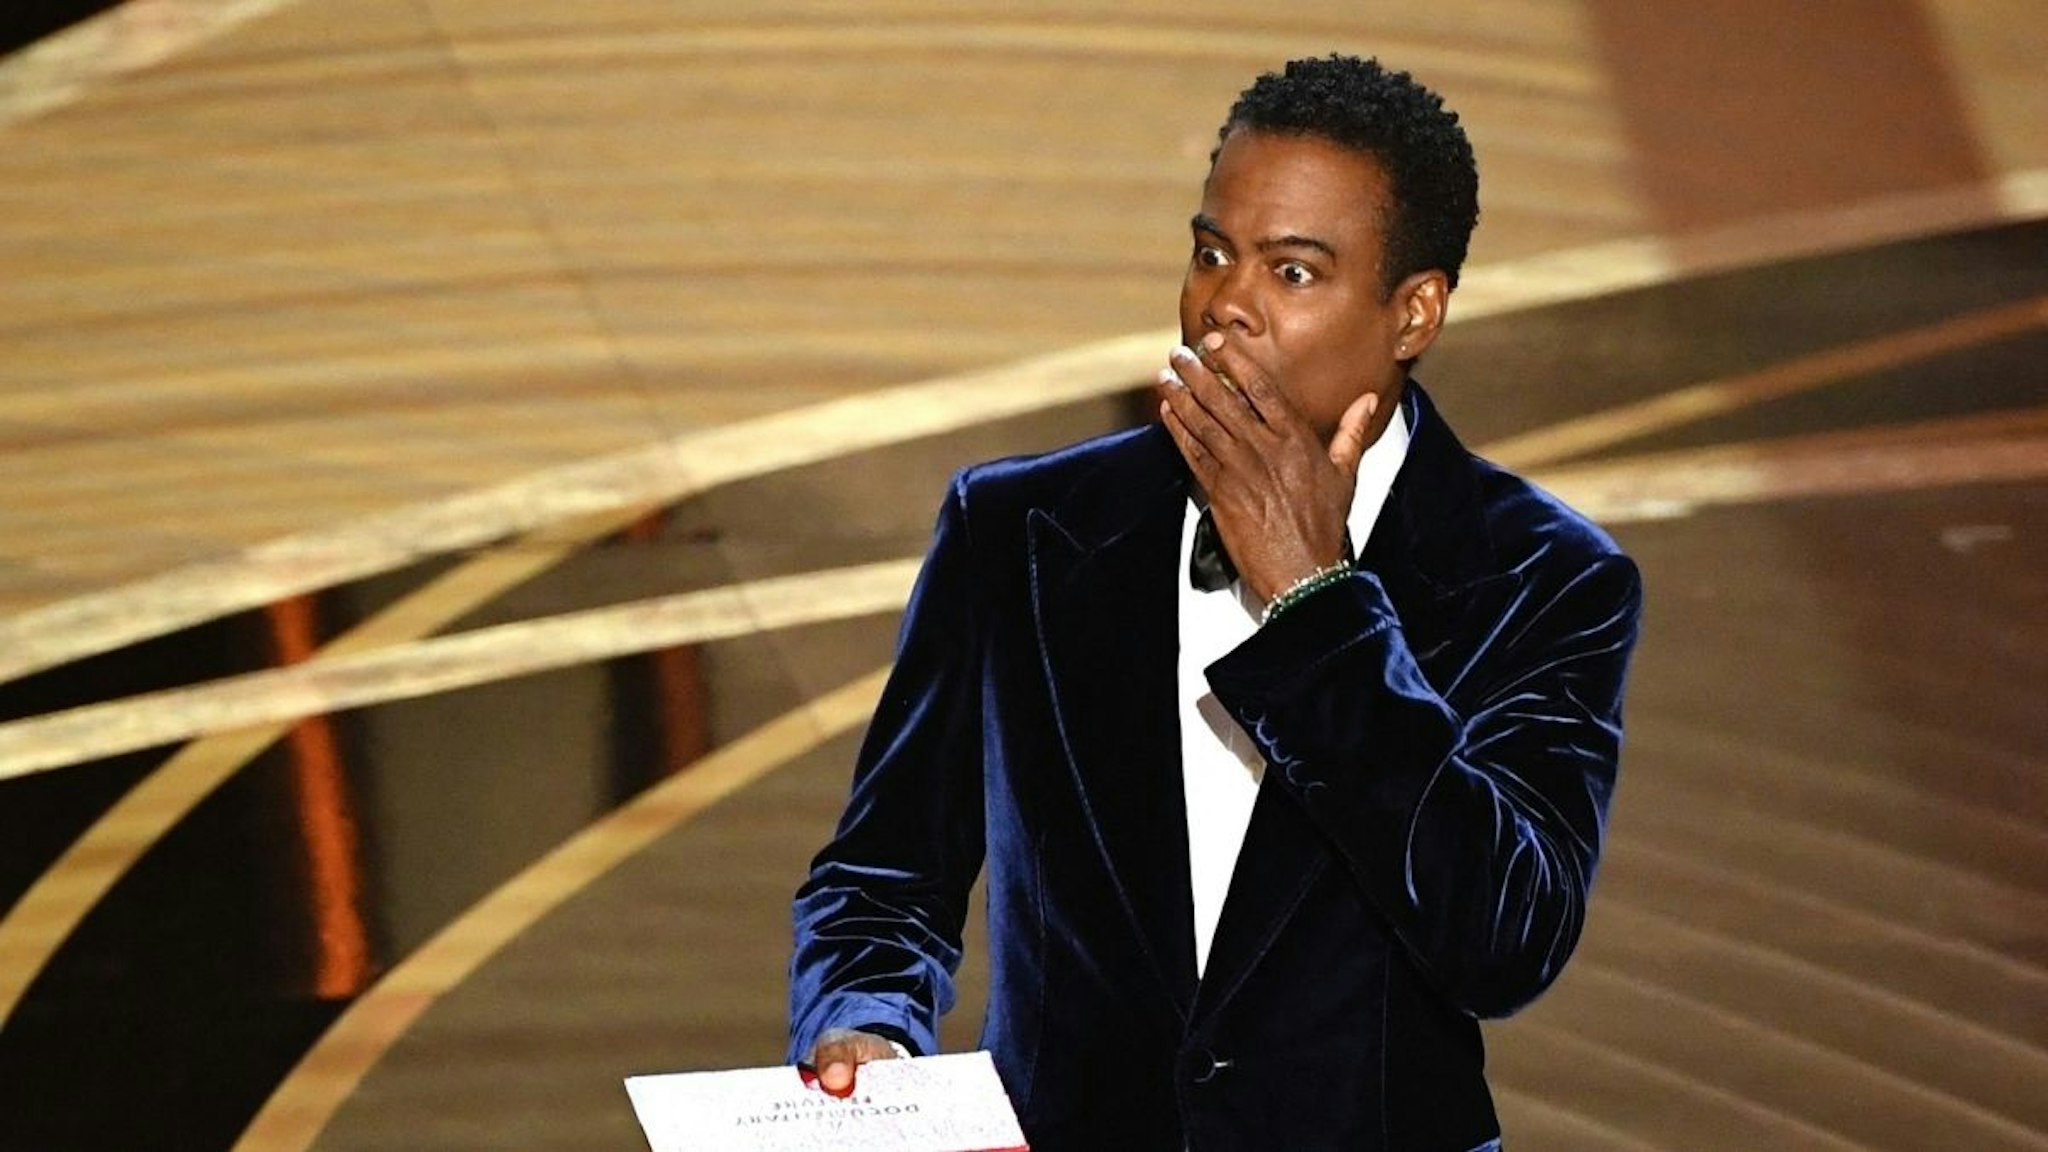 US actor Chris Rock speaks onstage during the 94th Oscars at the Dolby Theatre in Hollywood, California on March 27, 2022